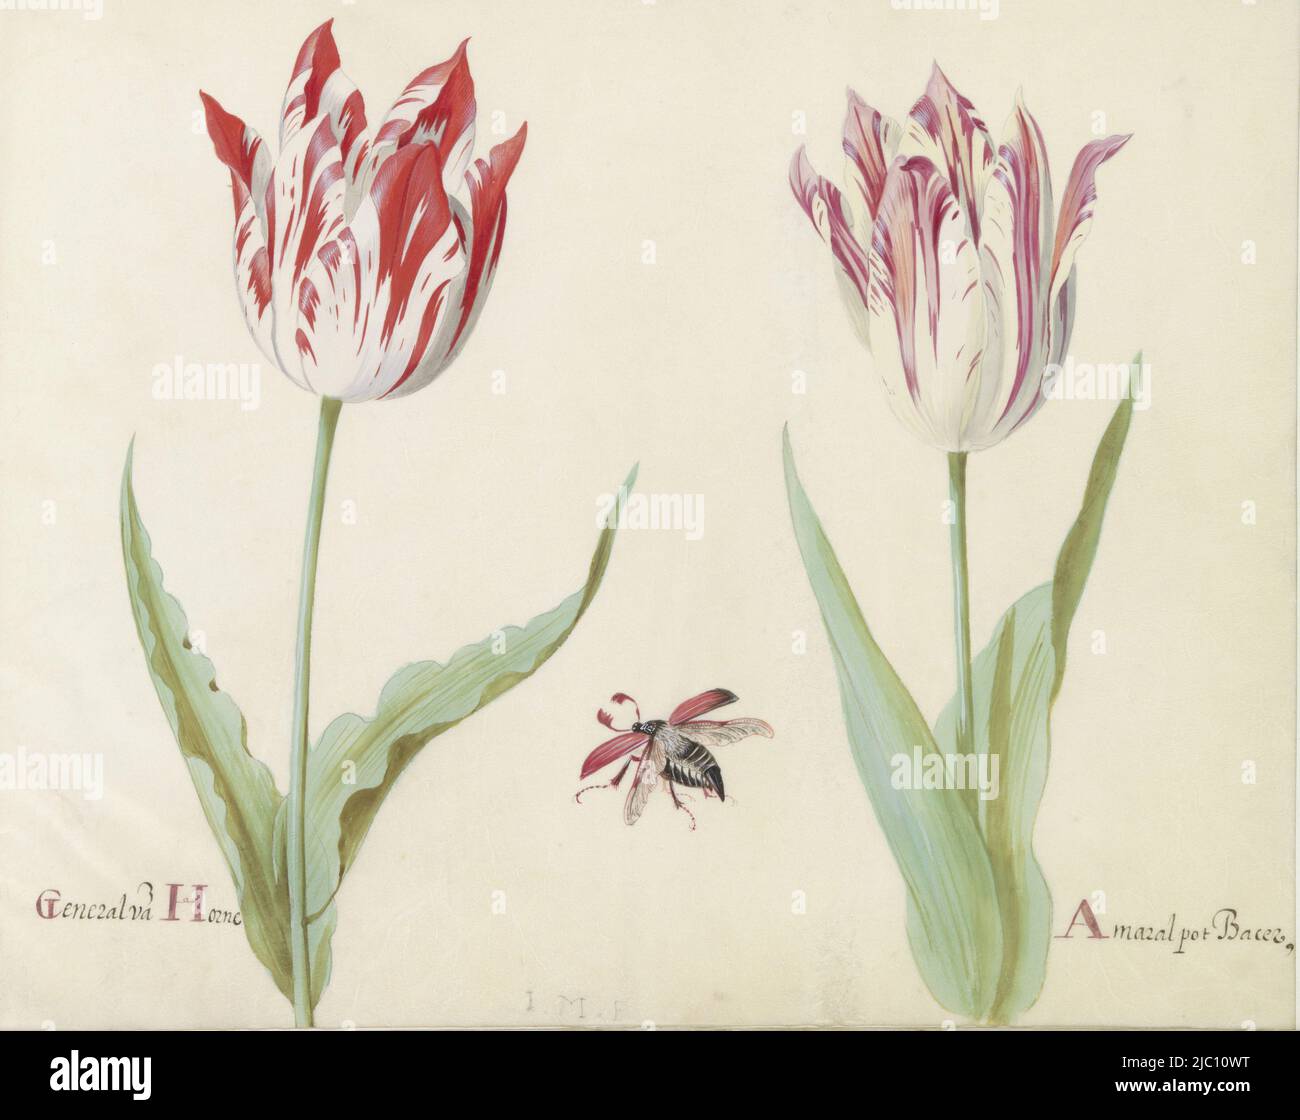 The drawing is part of an album, Two tulips with flying beetle General va(n) Horne / Amaral pot Bacer., draughtsman: Jacob Marrel, (mentioned on object), 1637, parchment (animal material), brush, h 265 mm × w 335 mm Stock Photo